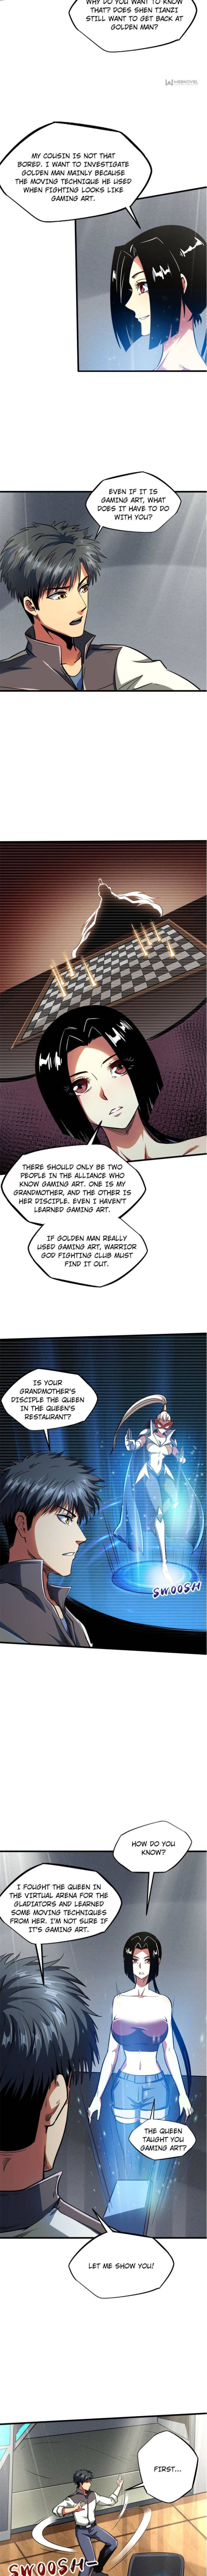 Super Gene Chapter 158 Page 2